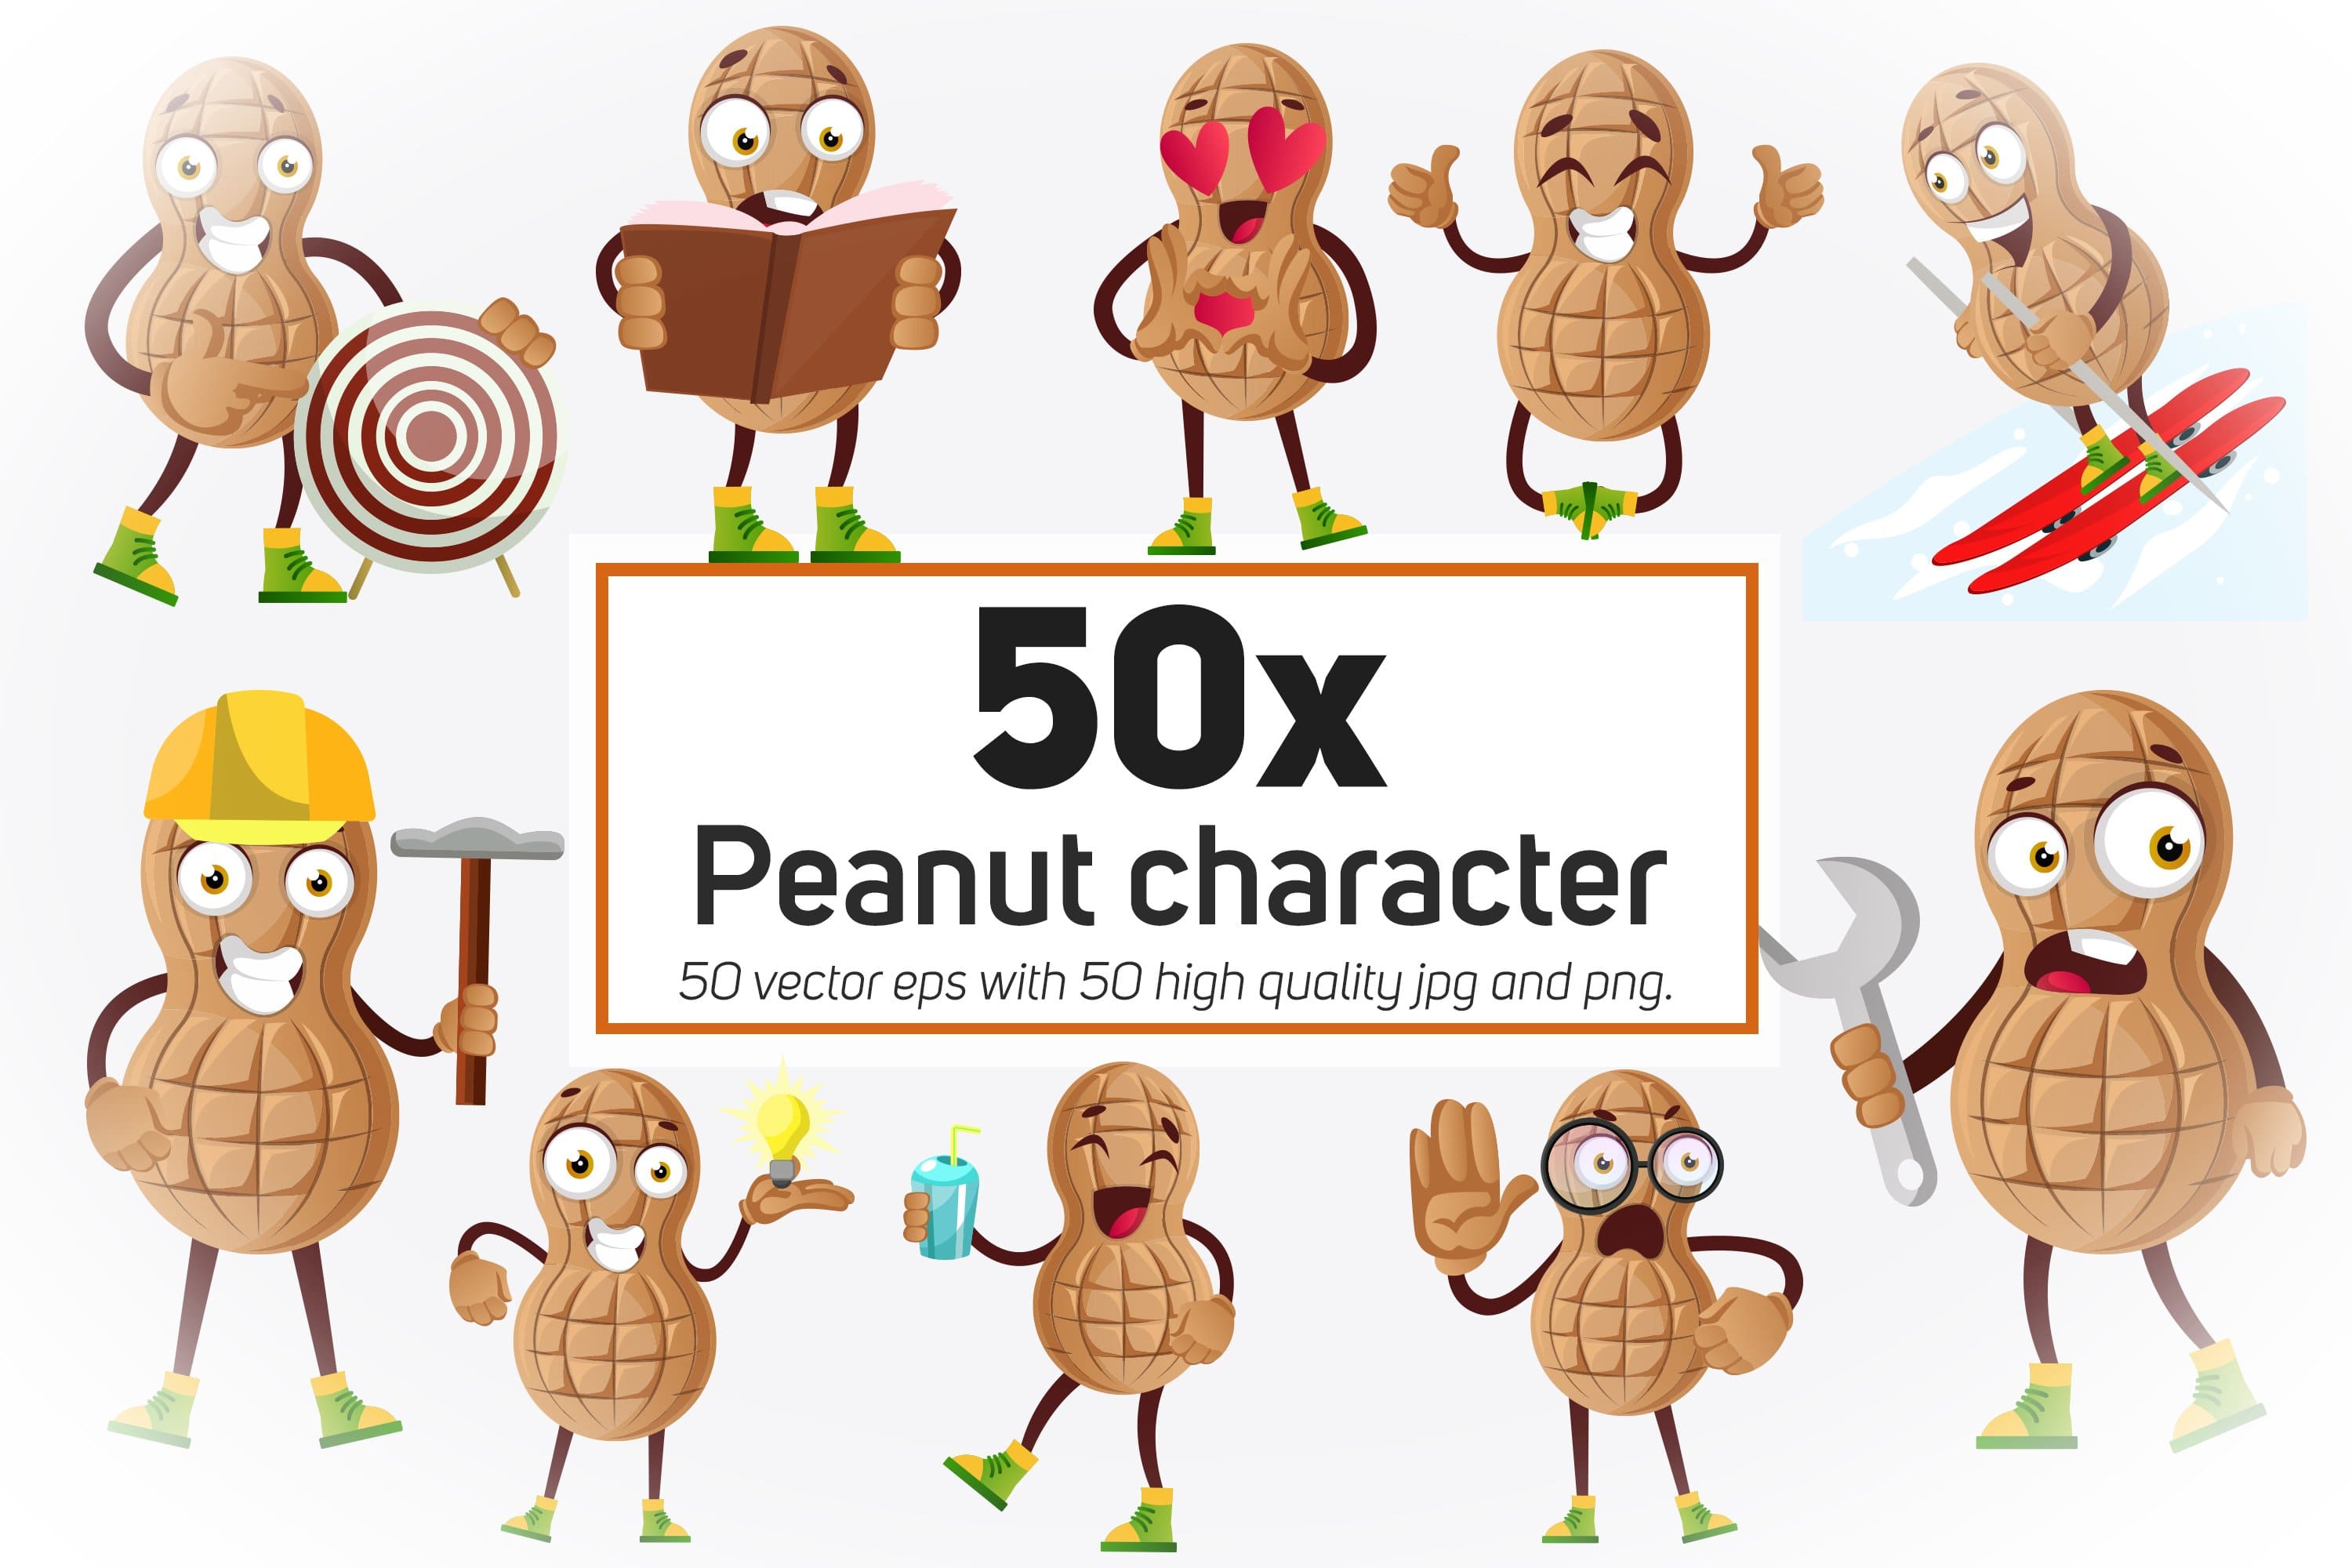 Peanut character pack title page.